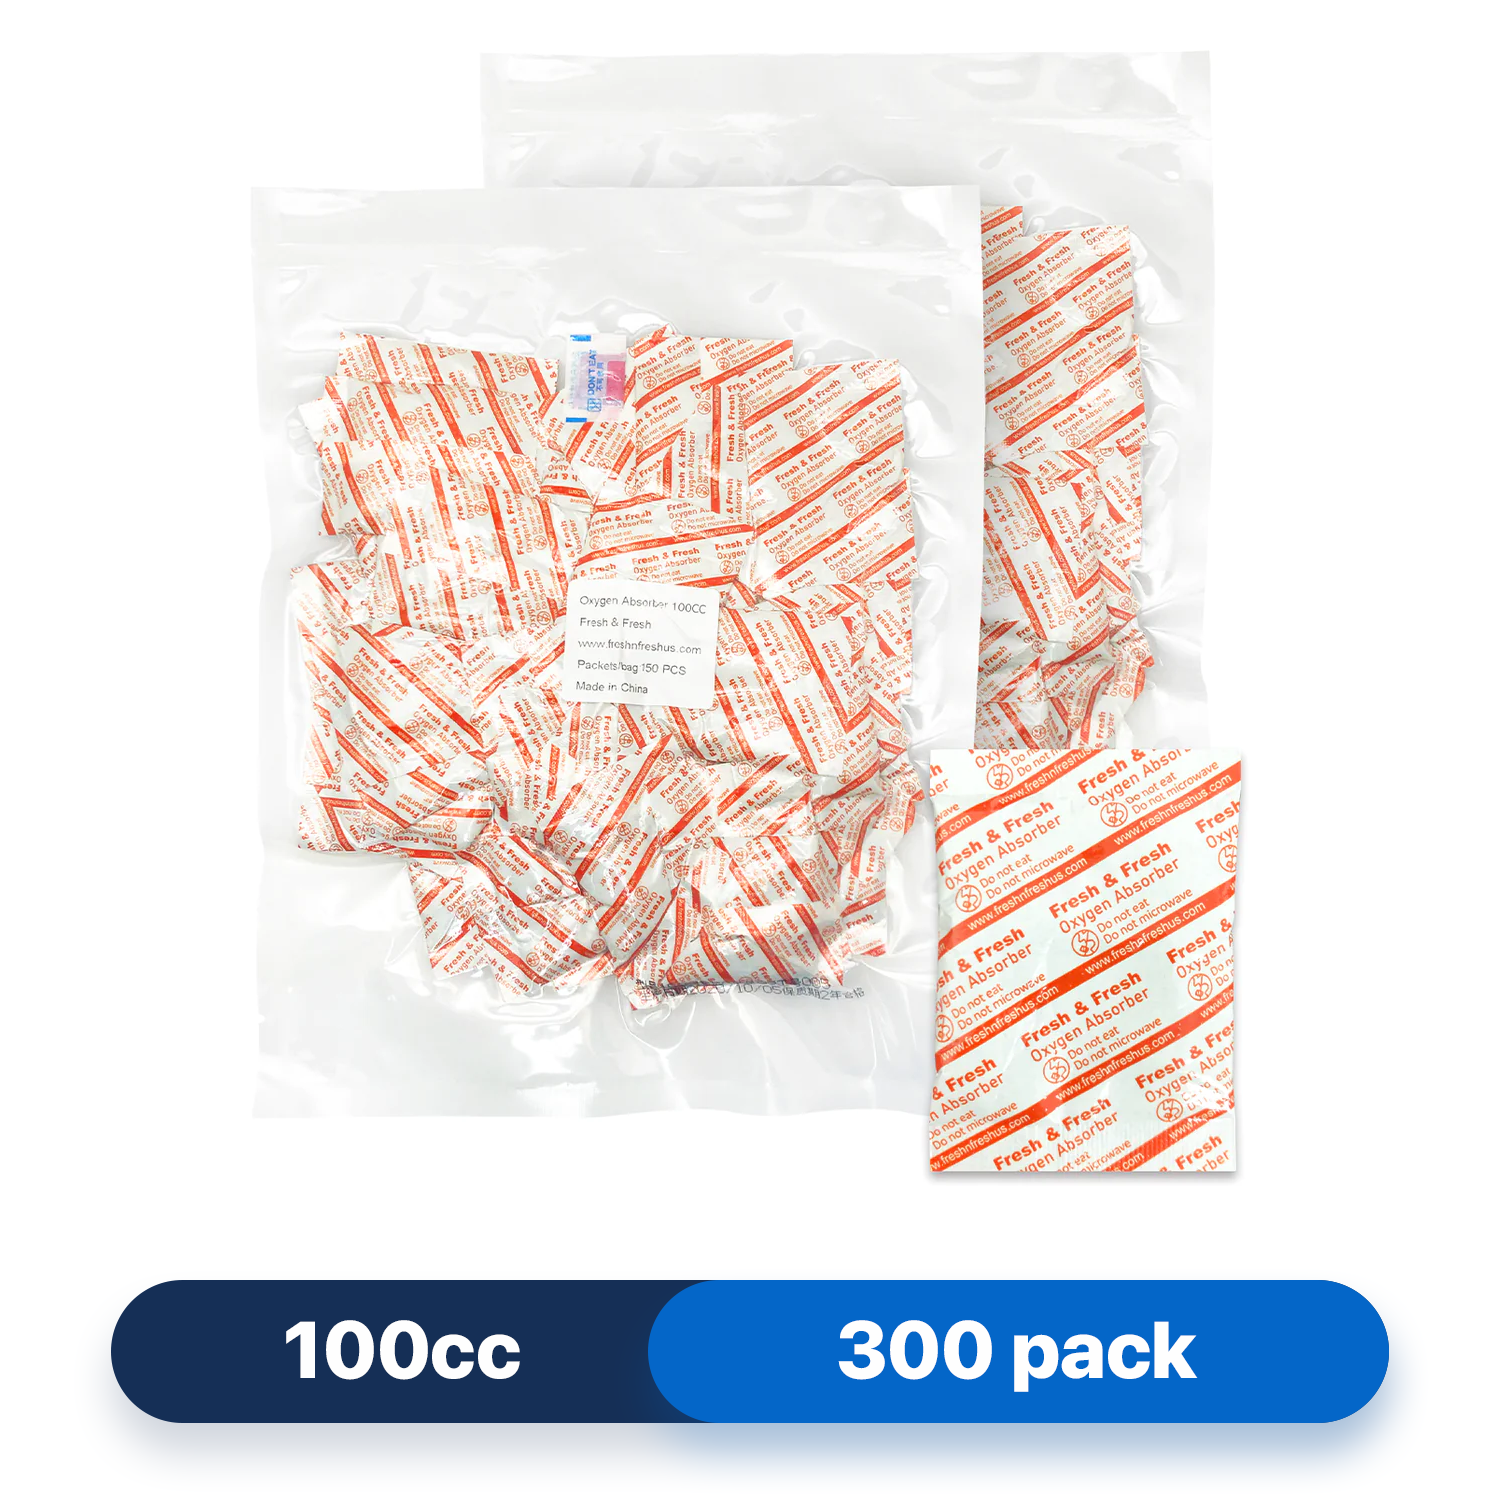 Fresh & Fresh (300 Packs) 100 CC Premium Oxygen Absorbers(2 Bag of 150 packets) - ISO 9001 Certified Facility Manufactured